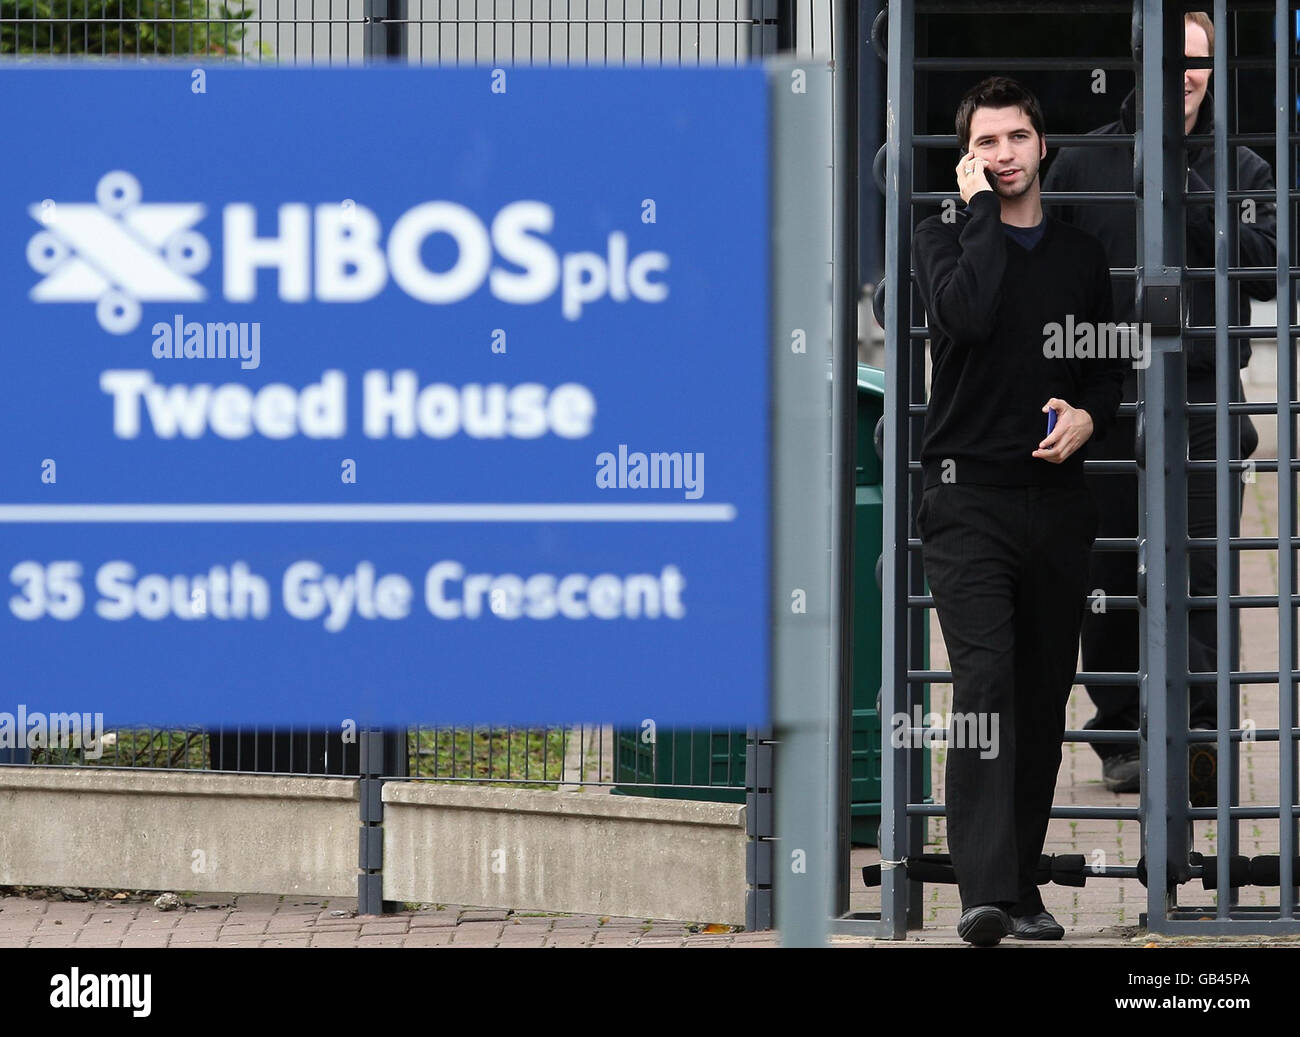 People leave Tweed House, a Halifax Bank of Scotland building in the Gyle  in Edinburgh Stock Photo - Alamy